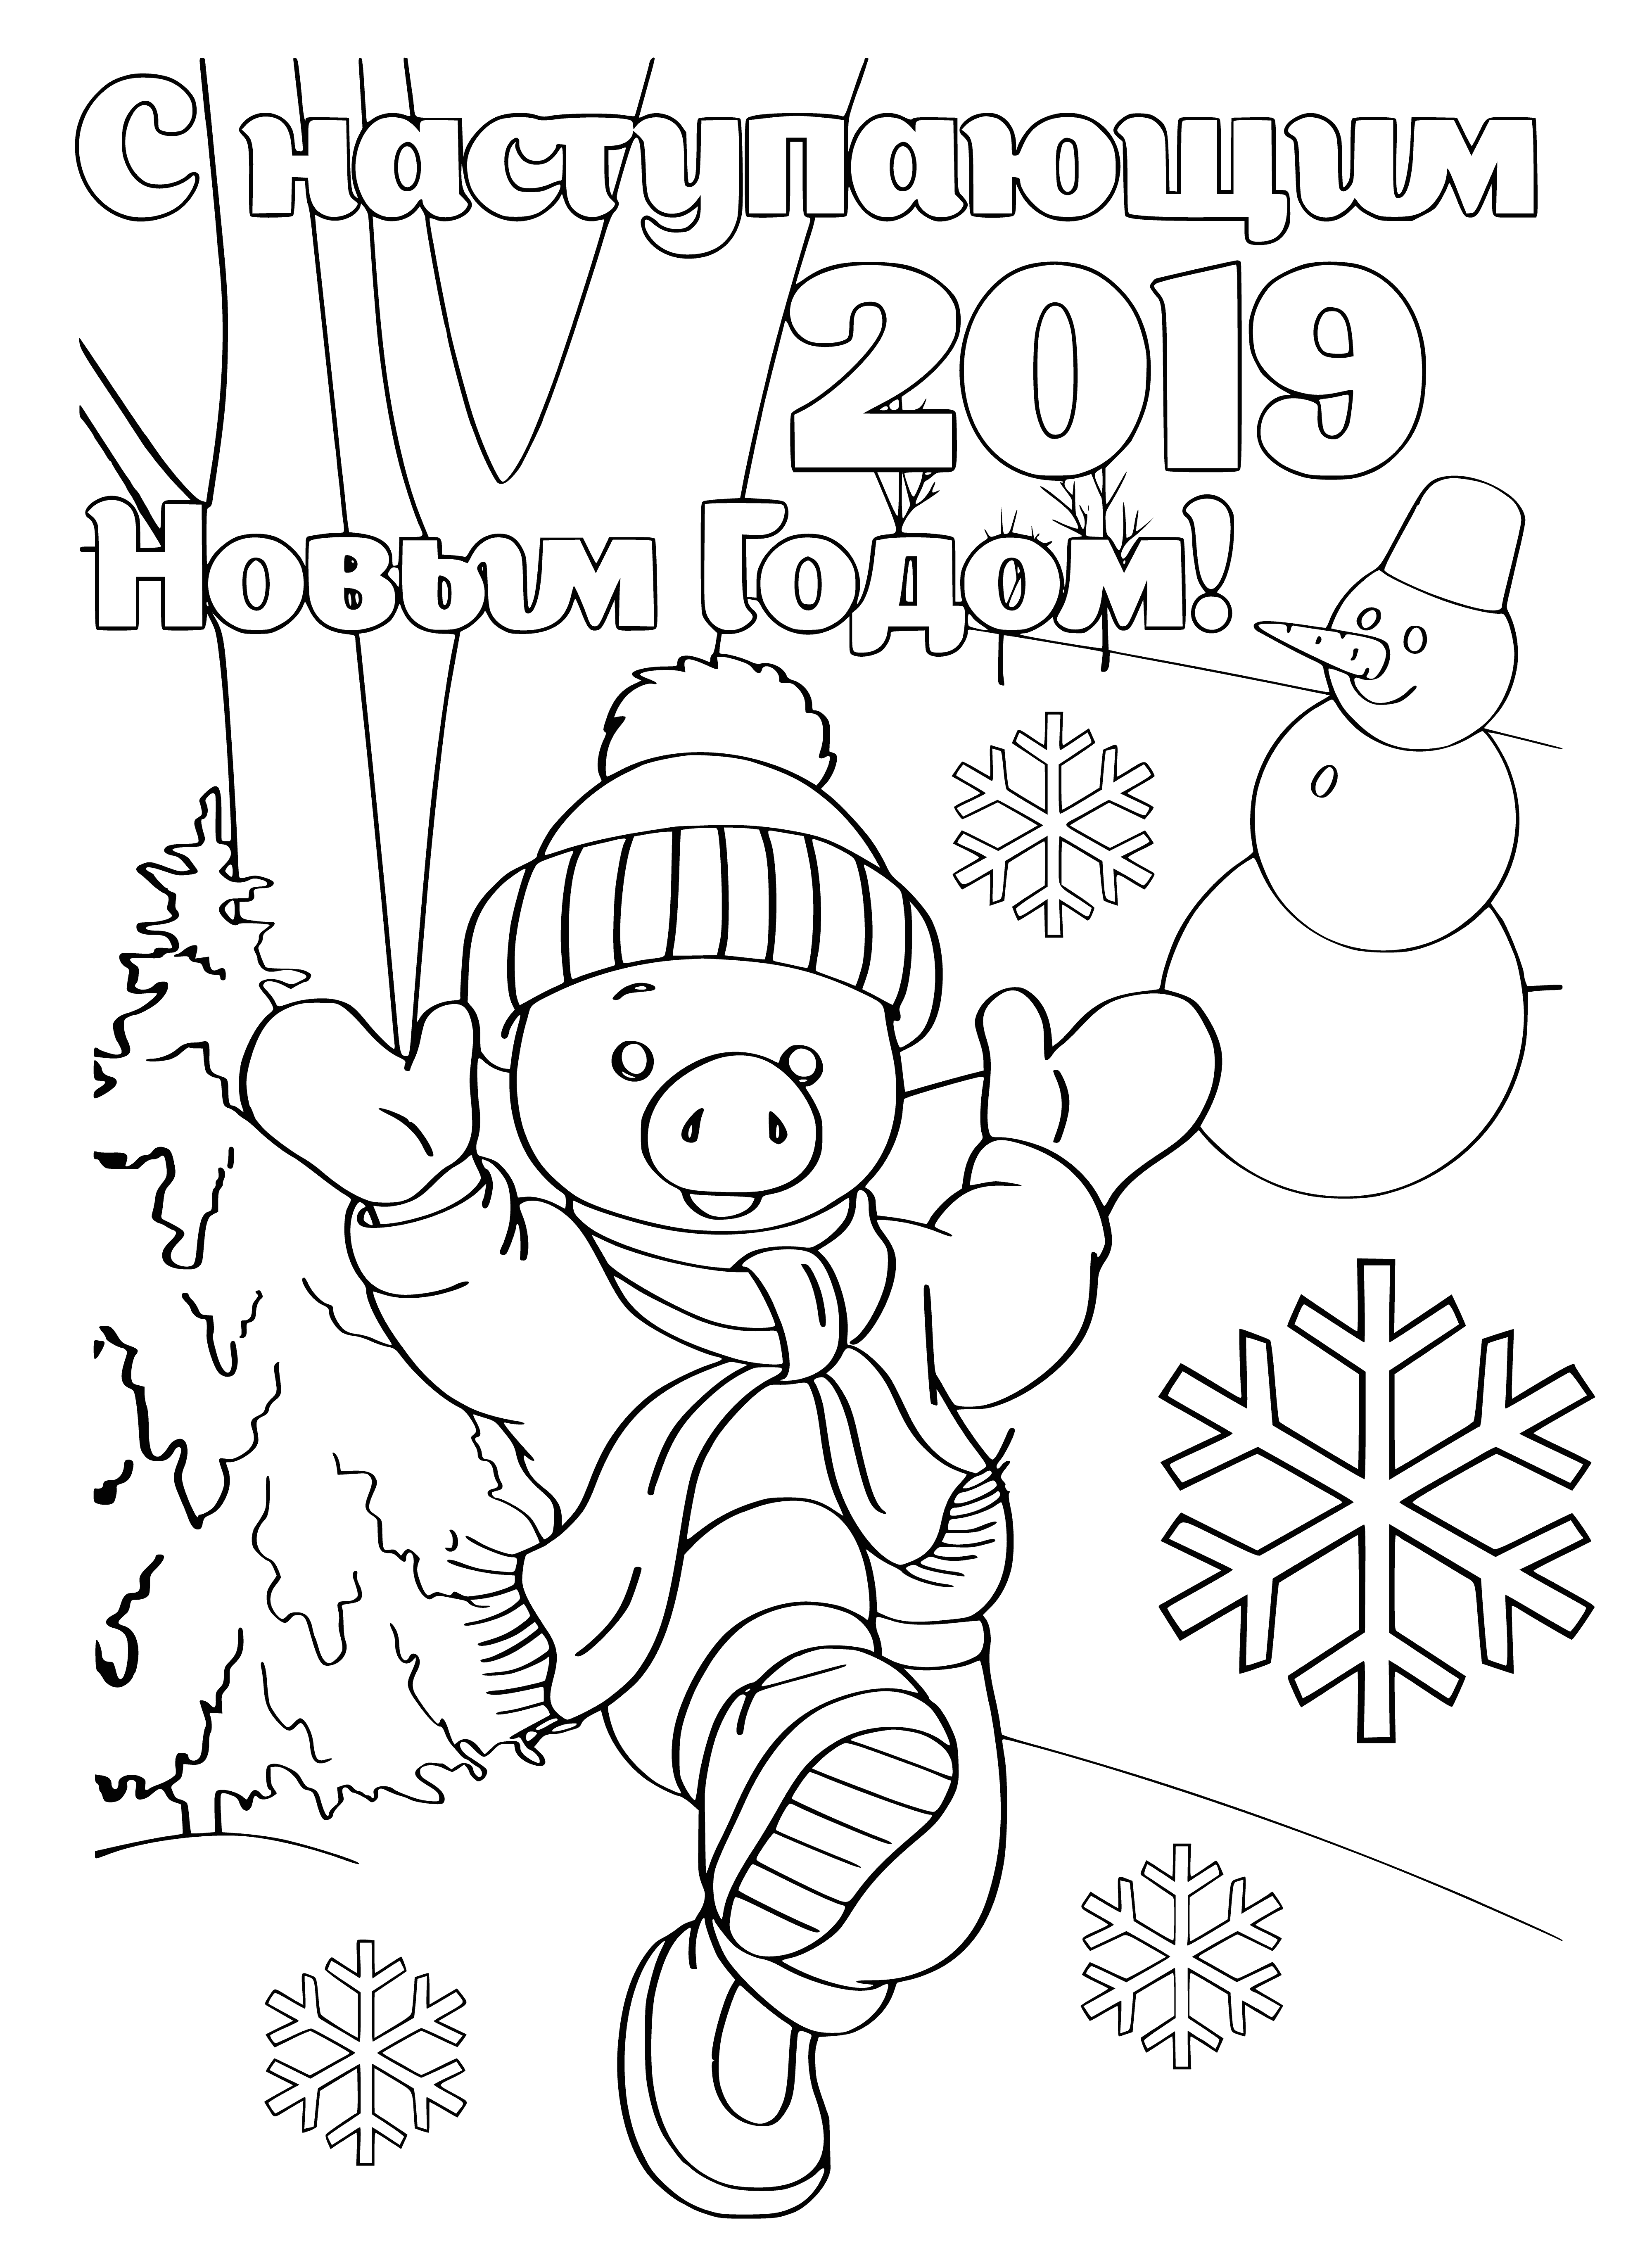 coloring page: Piglet wearing red scarf, hat and holding red snowball in snowy scene - ideal for coloring!